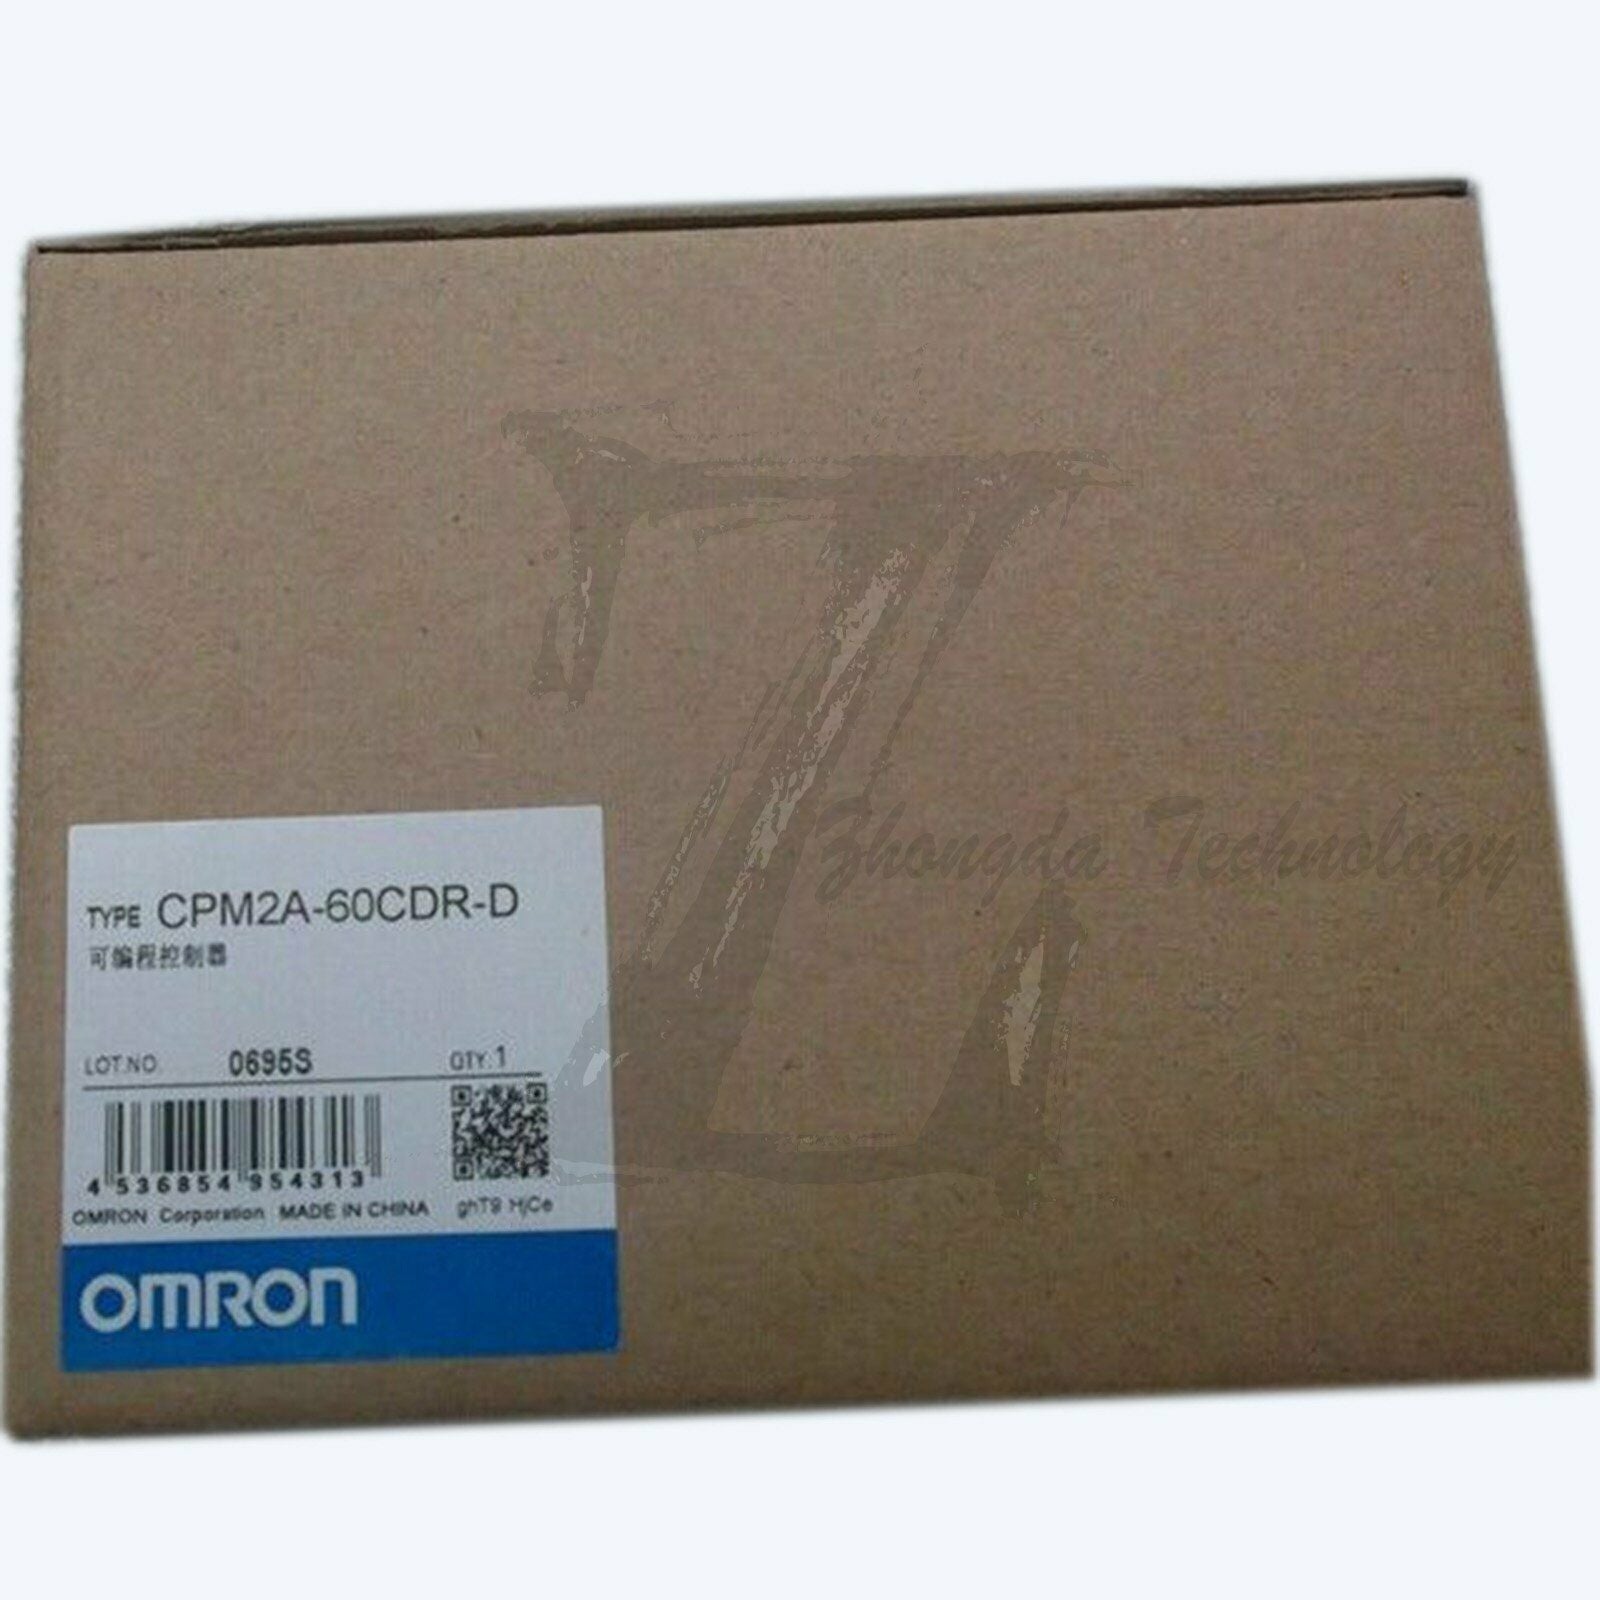 1pc new Omron CPM2A-60CDR-D module one year warranty KOEED 201-500, 80%, import_2020_10_10_031751, Omron, Other